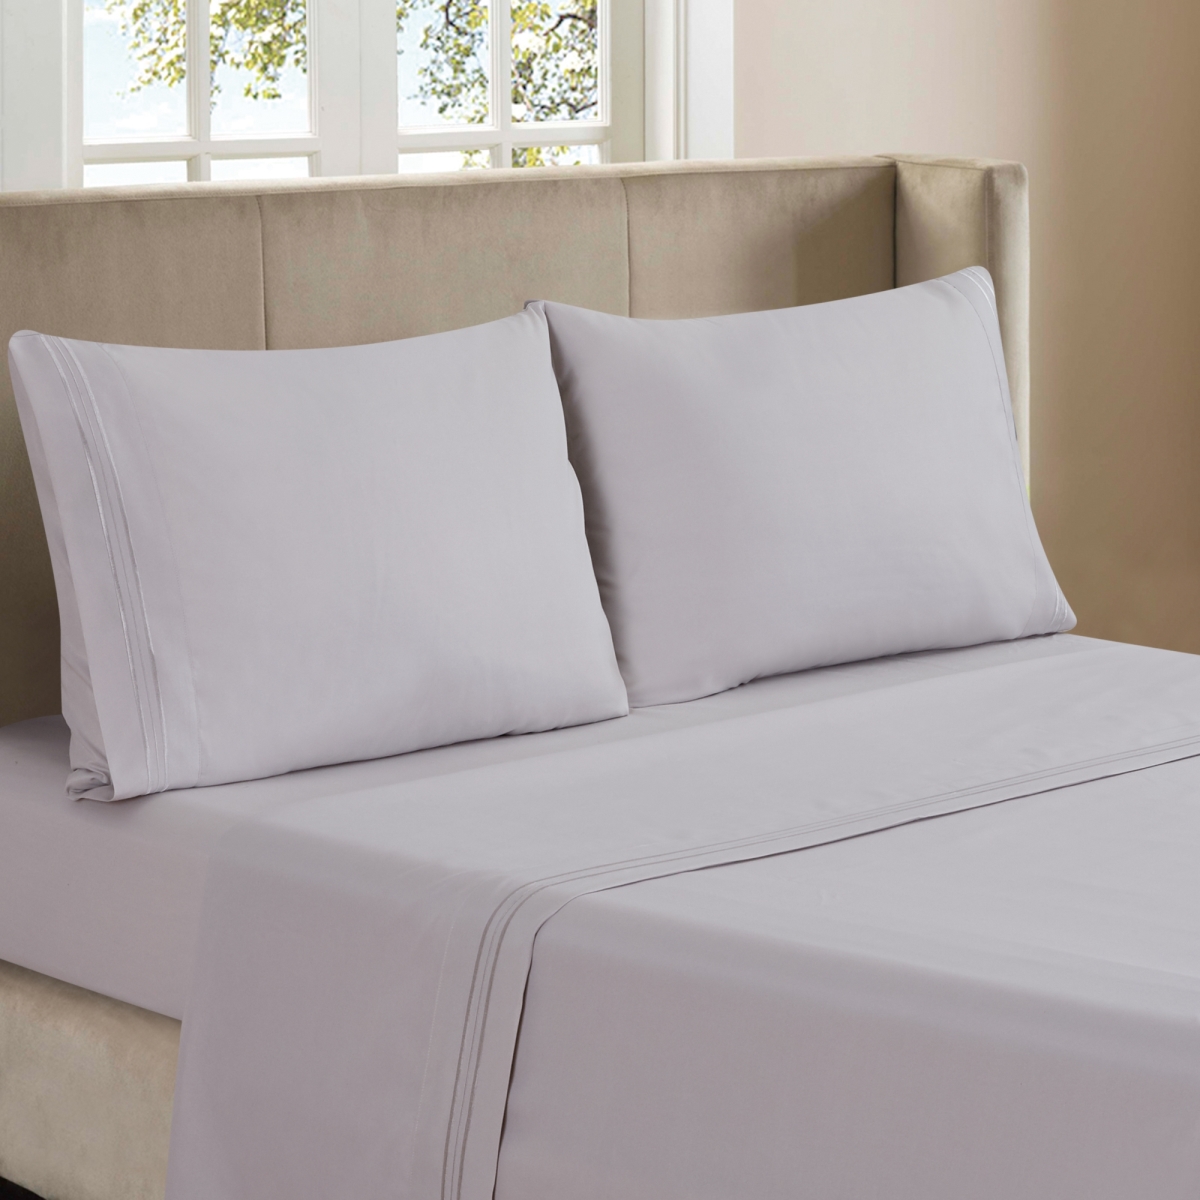 Whtx607-lgq 3-line Embroidered Light Grey Polyester Sheet Set - Queen Size - 4 Piece